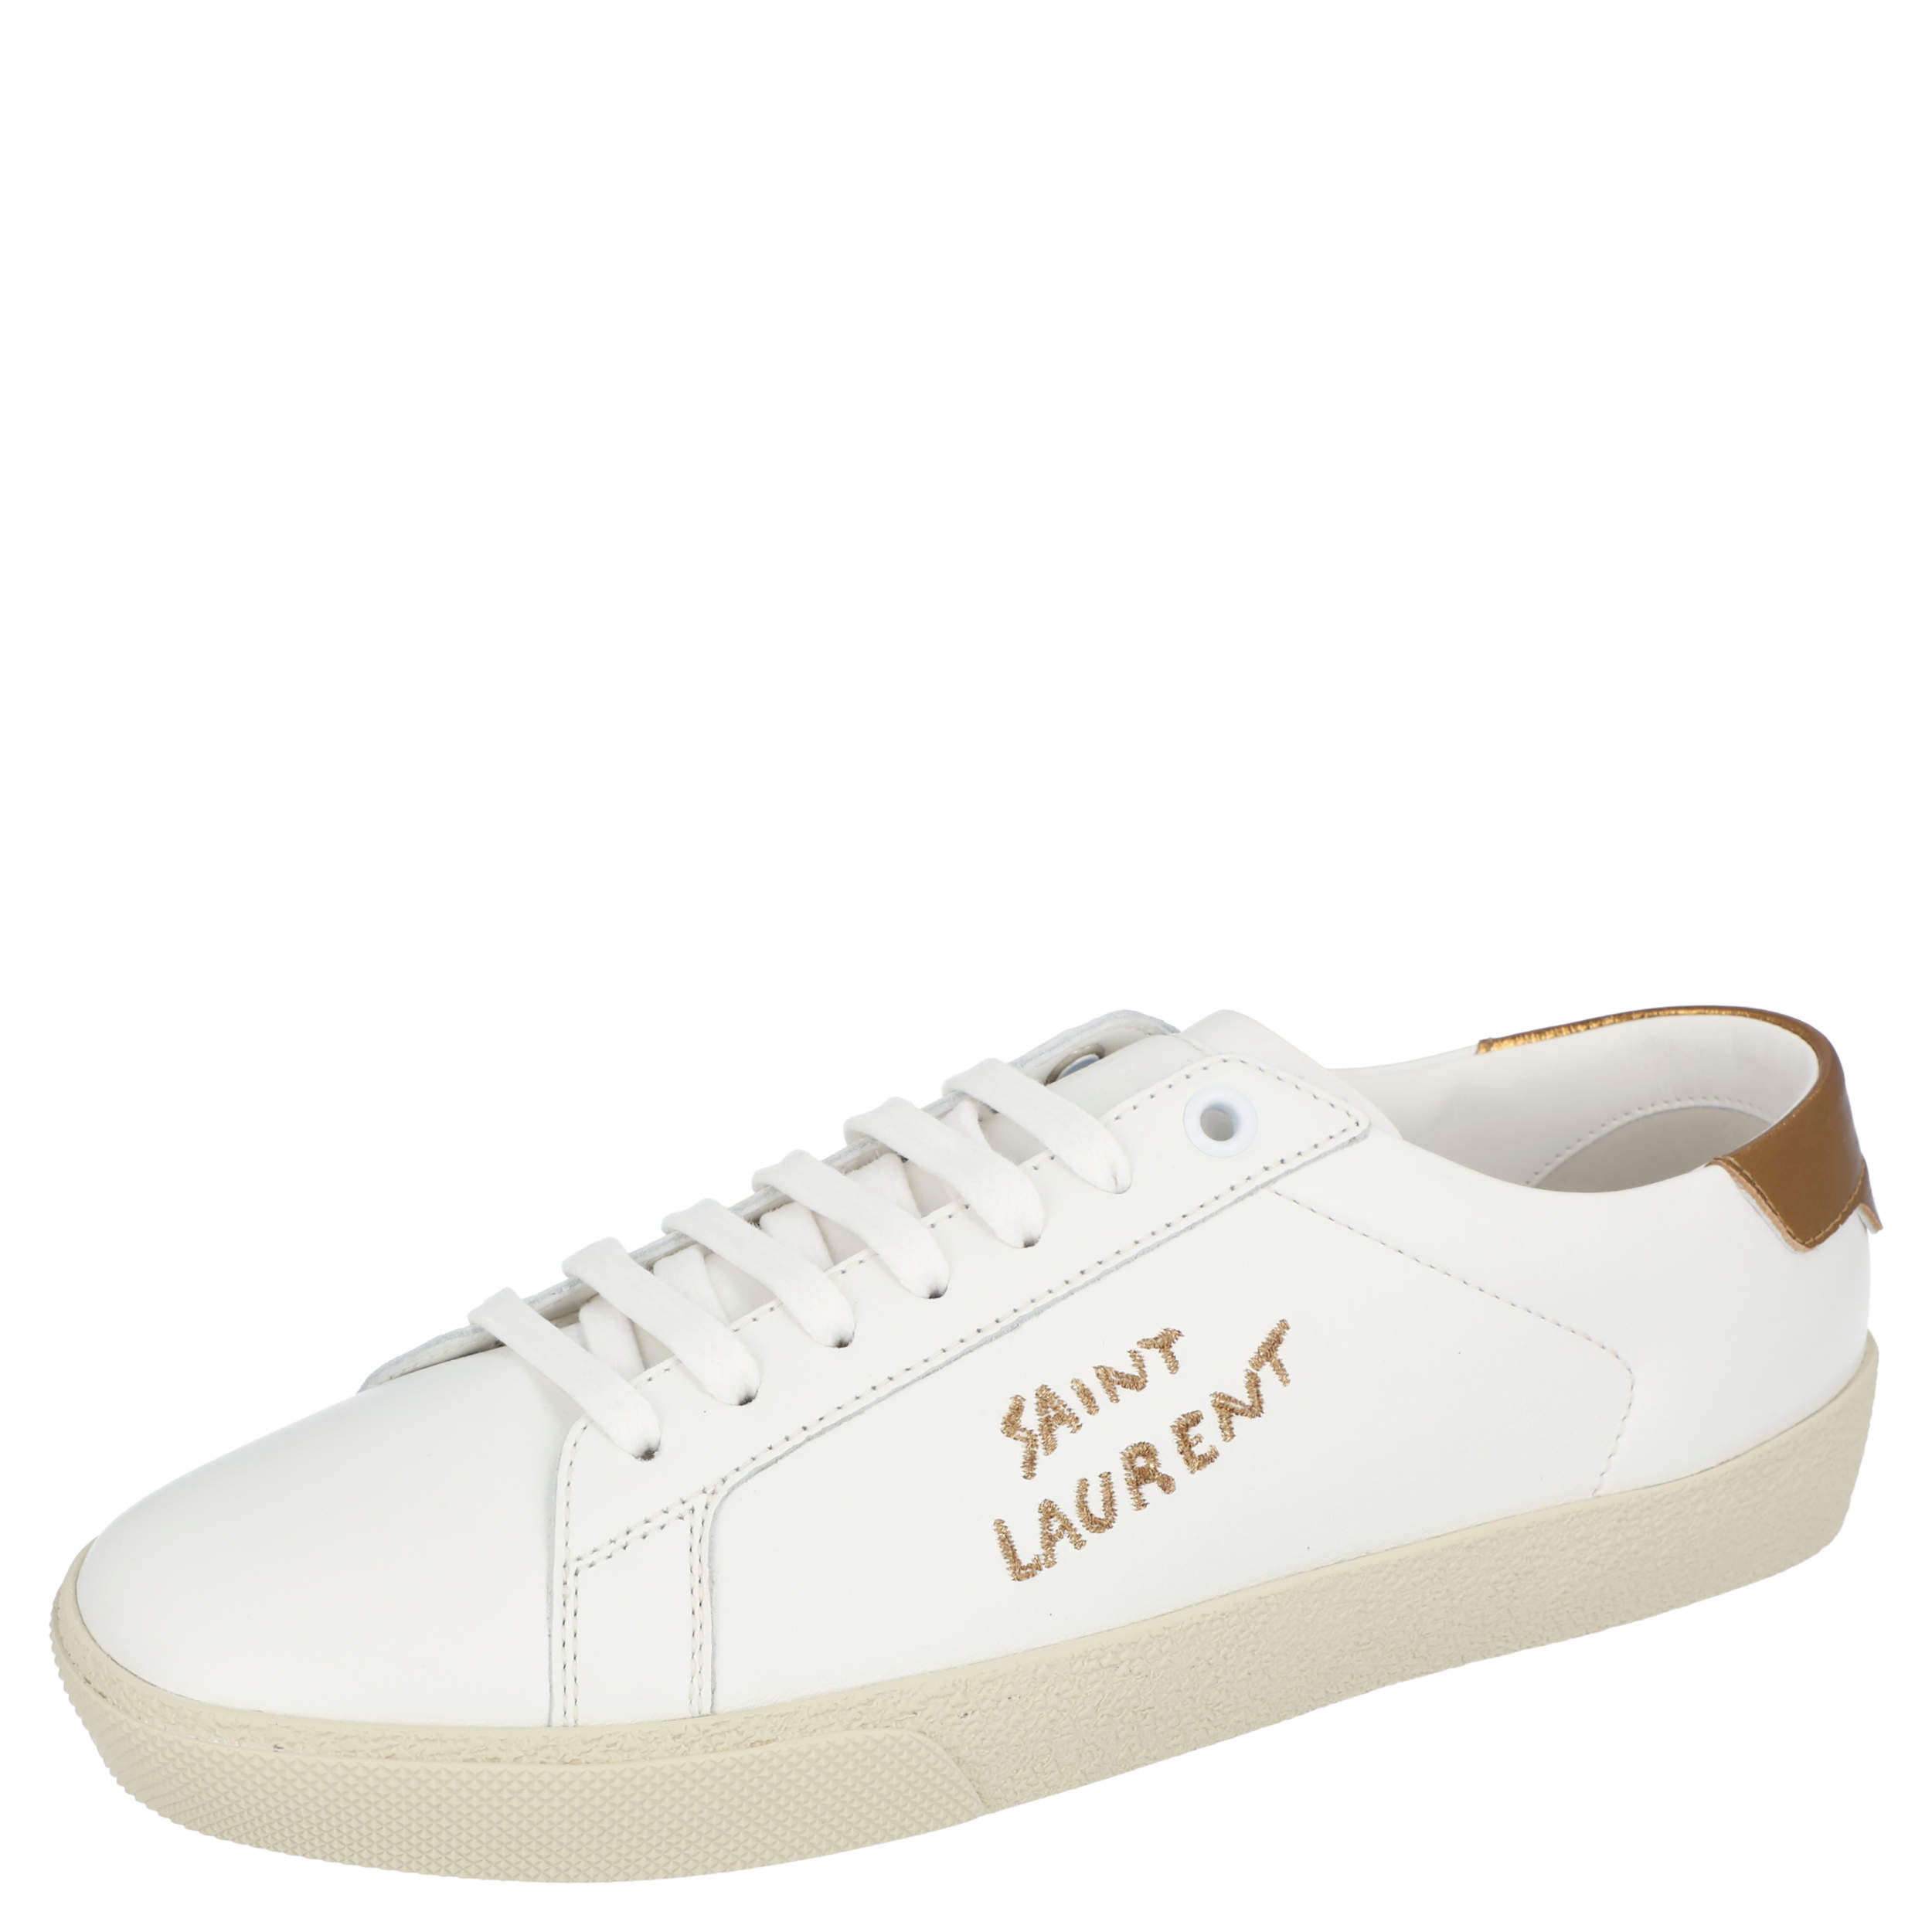 Saint Laurent White/Brown Leather Court Classic Sneakers Size EU 38